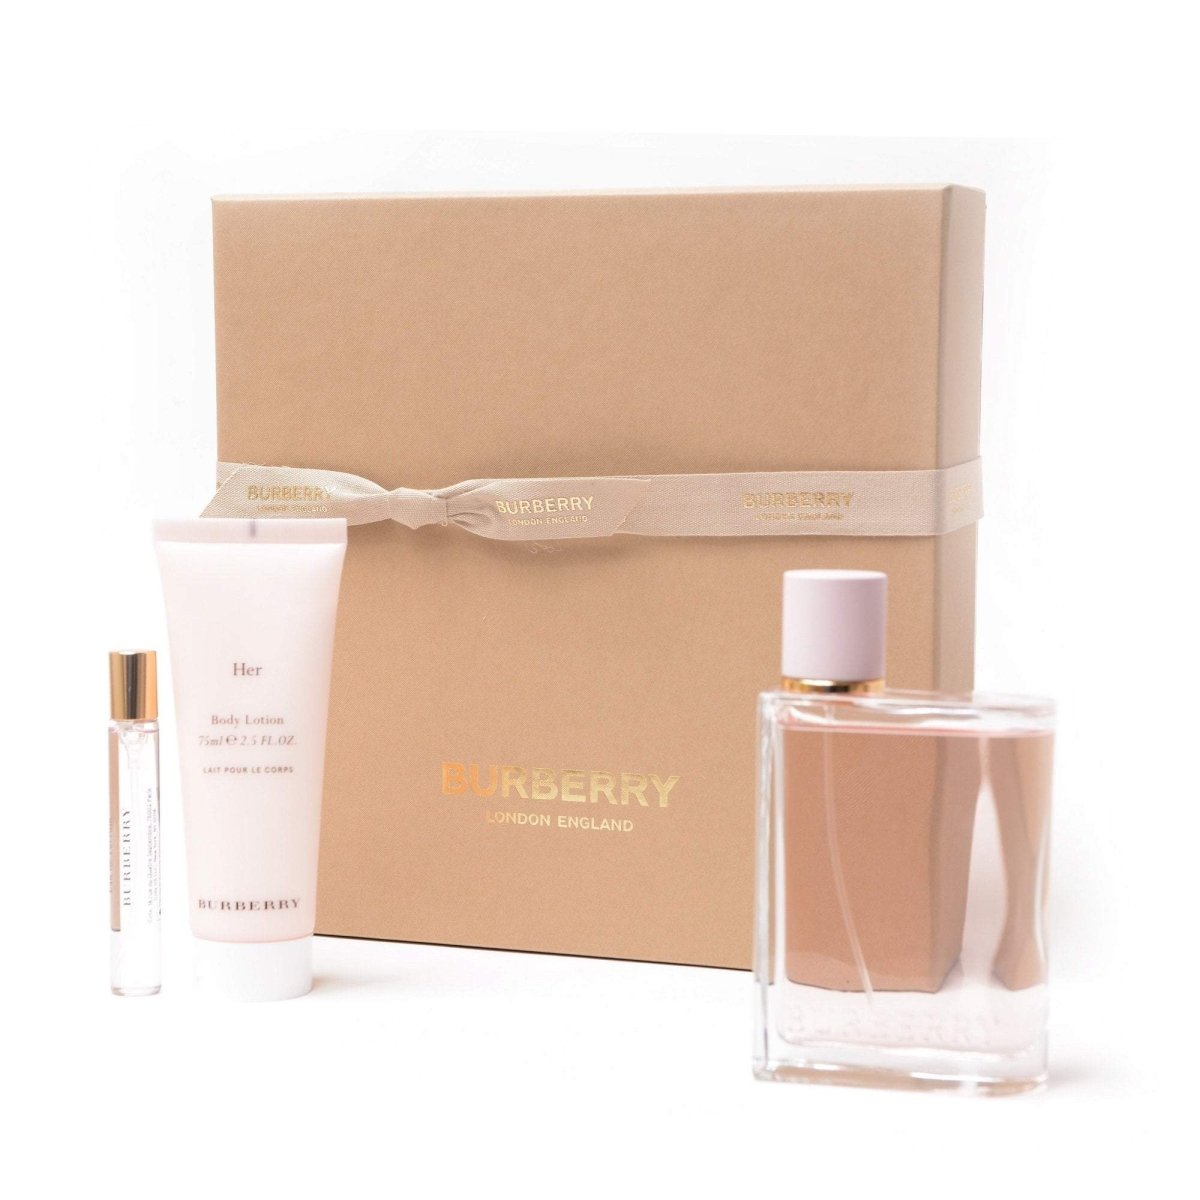 Burberry Her Gift Set for Women by Burberry